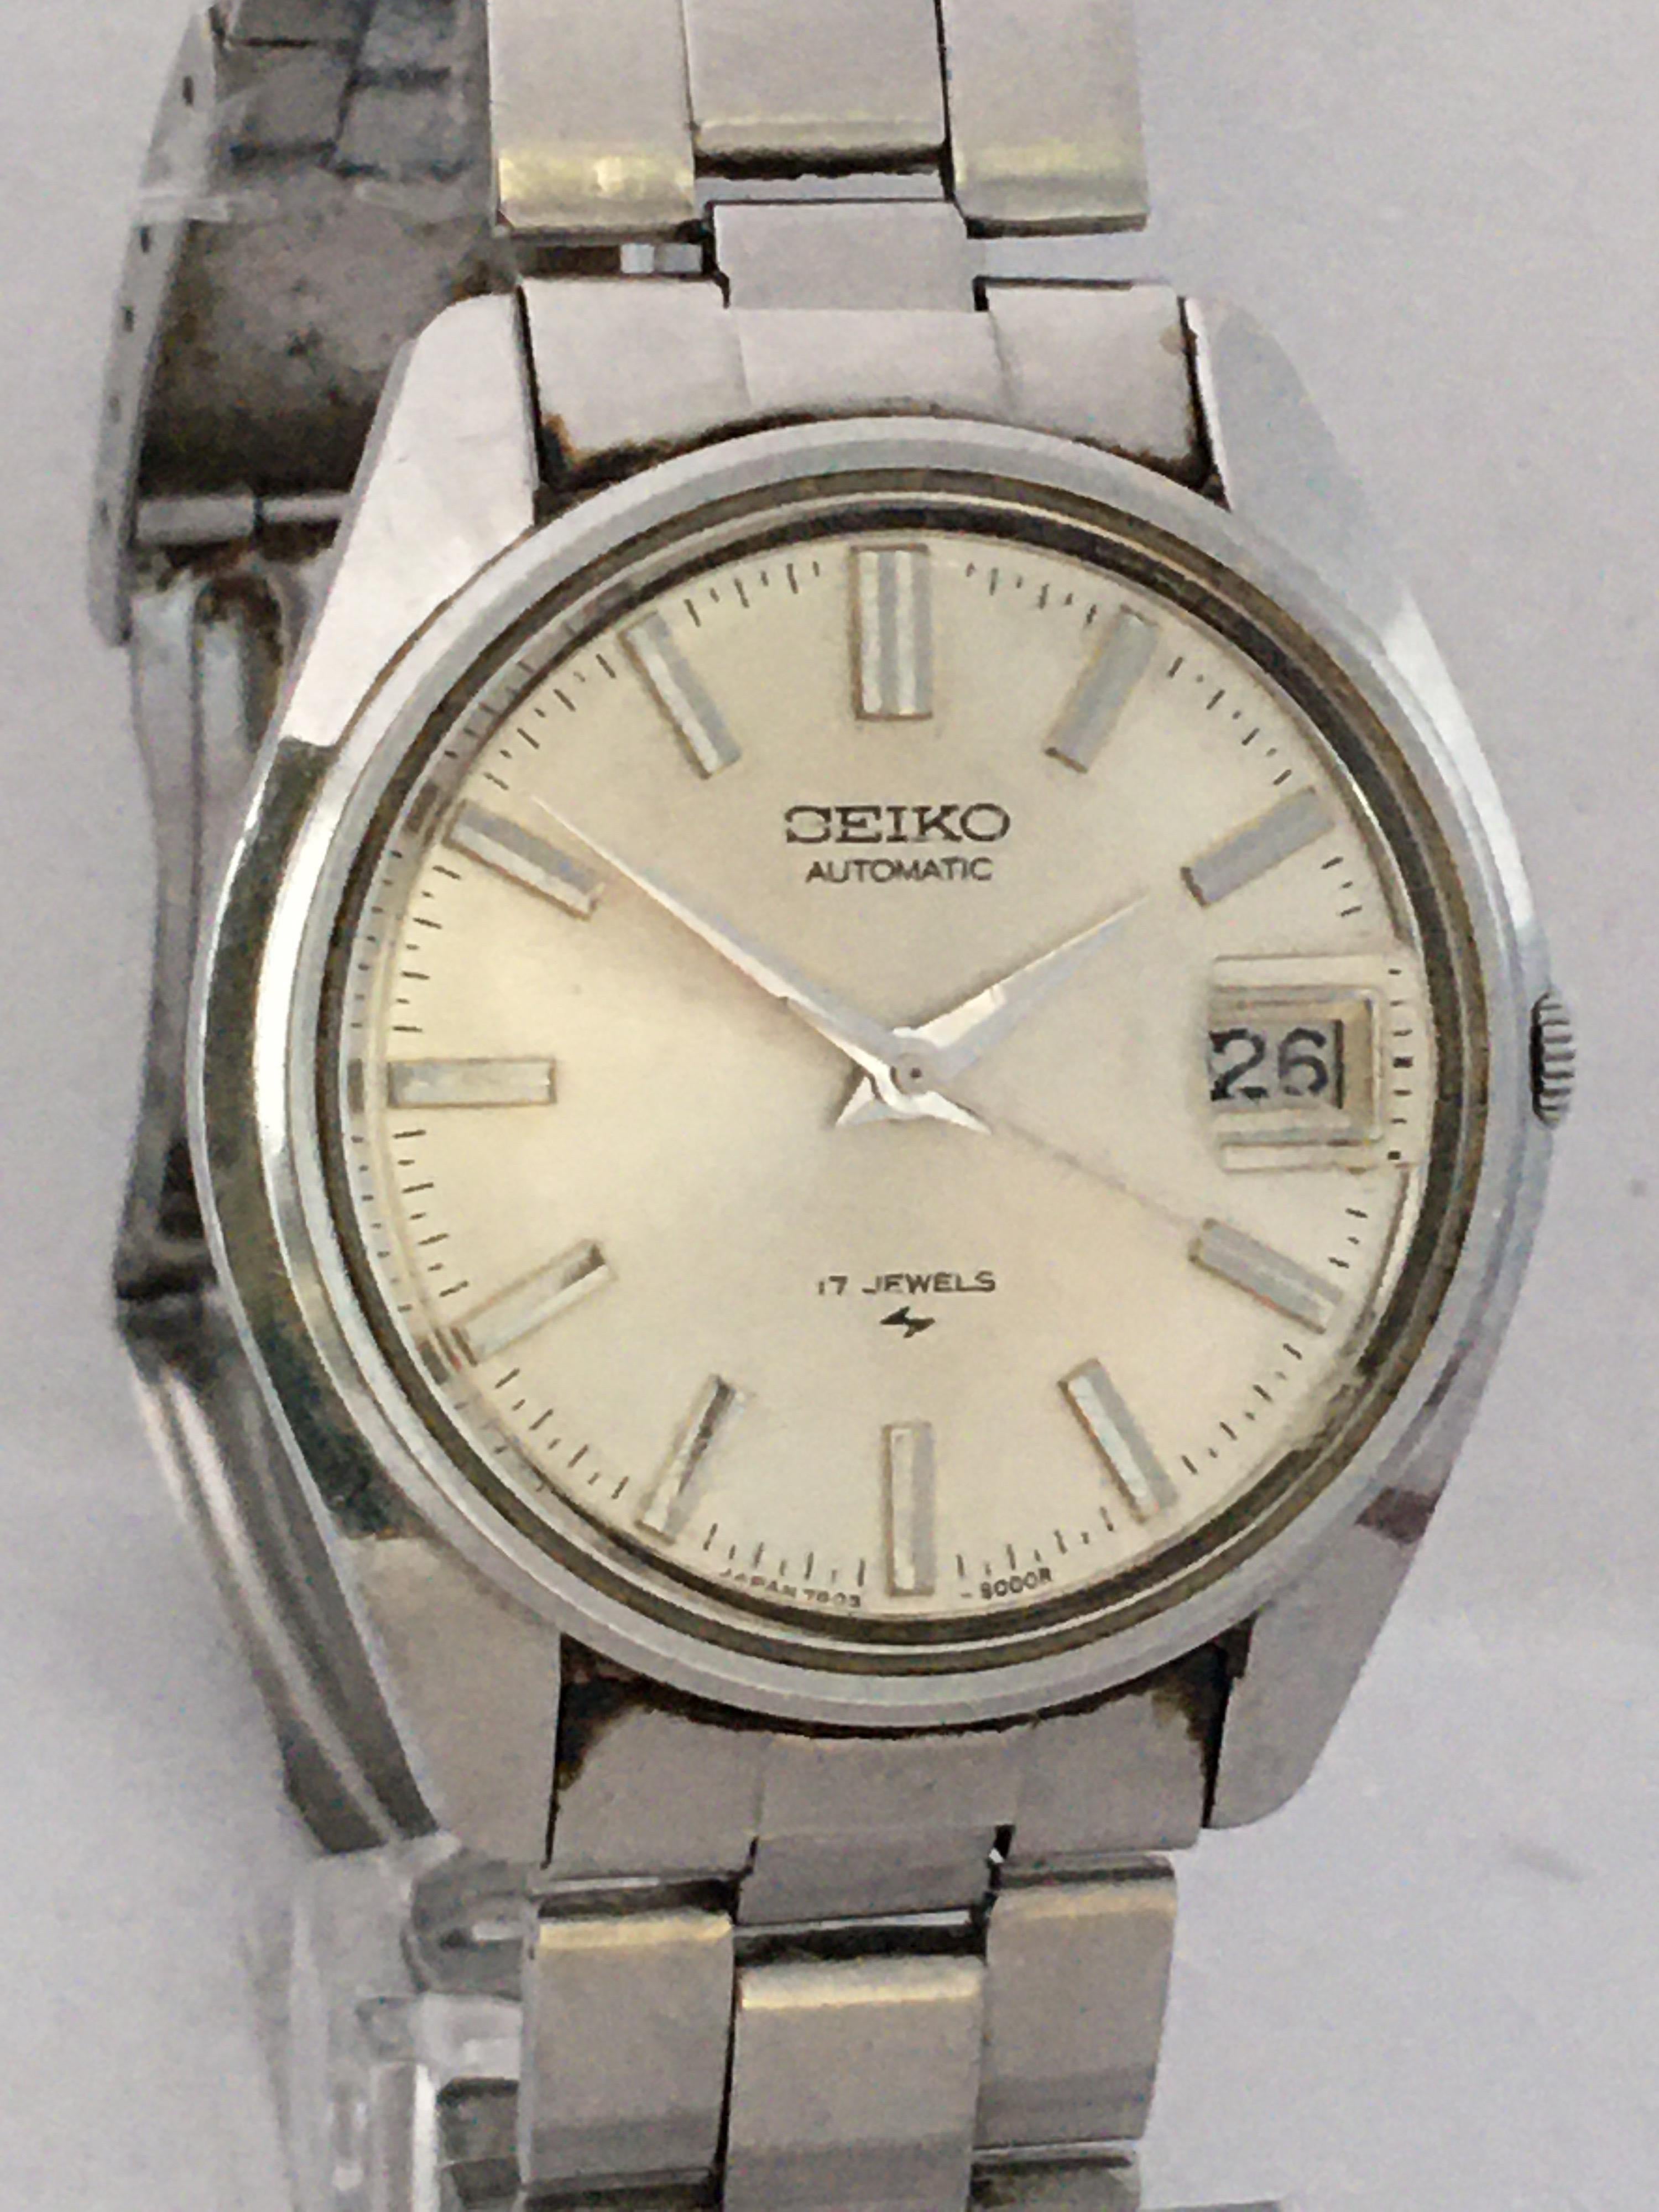 Vintage 1970s Stainless Steel Seiko Automatic Wristwatch 5